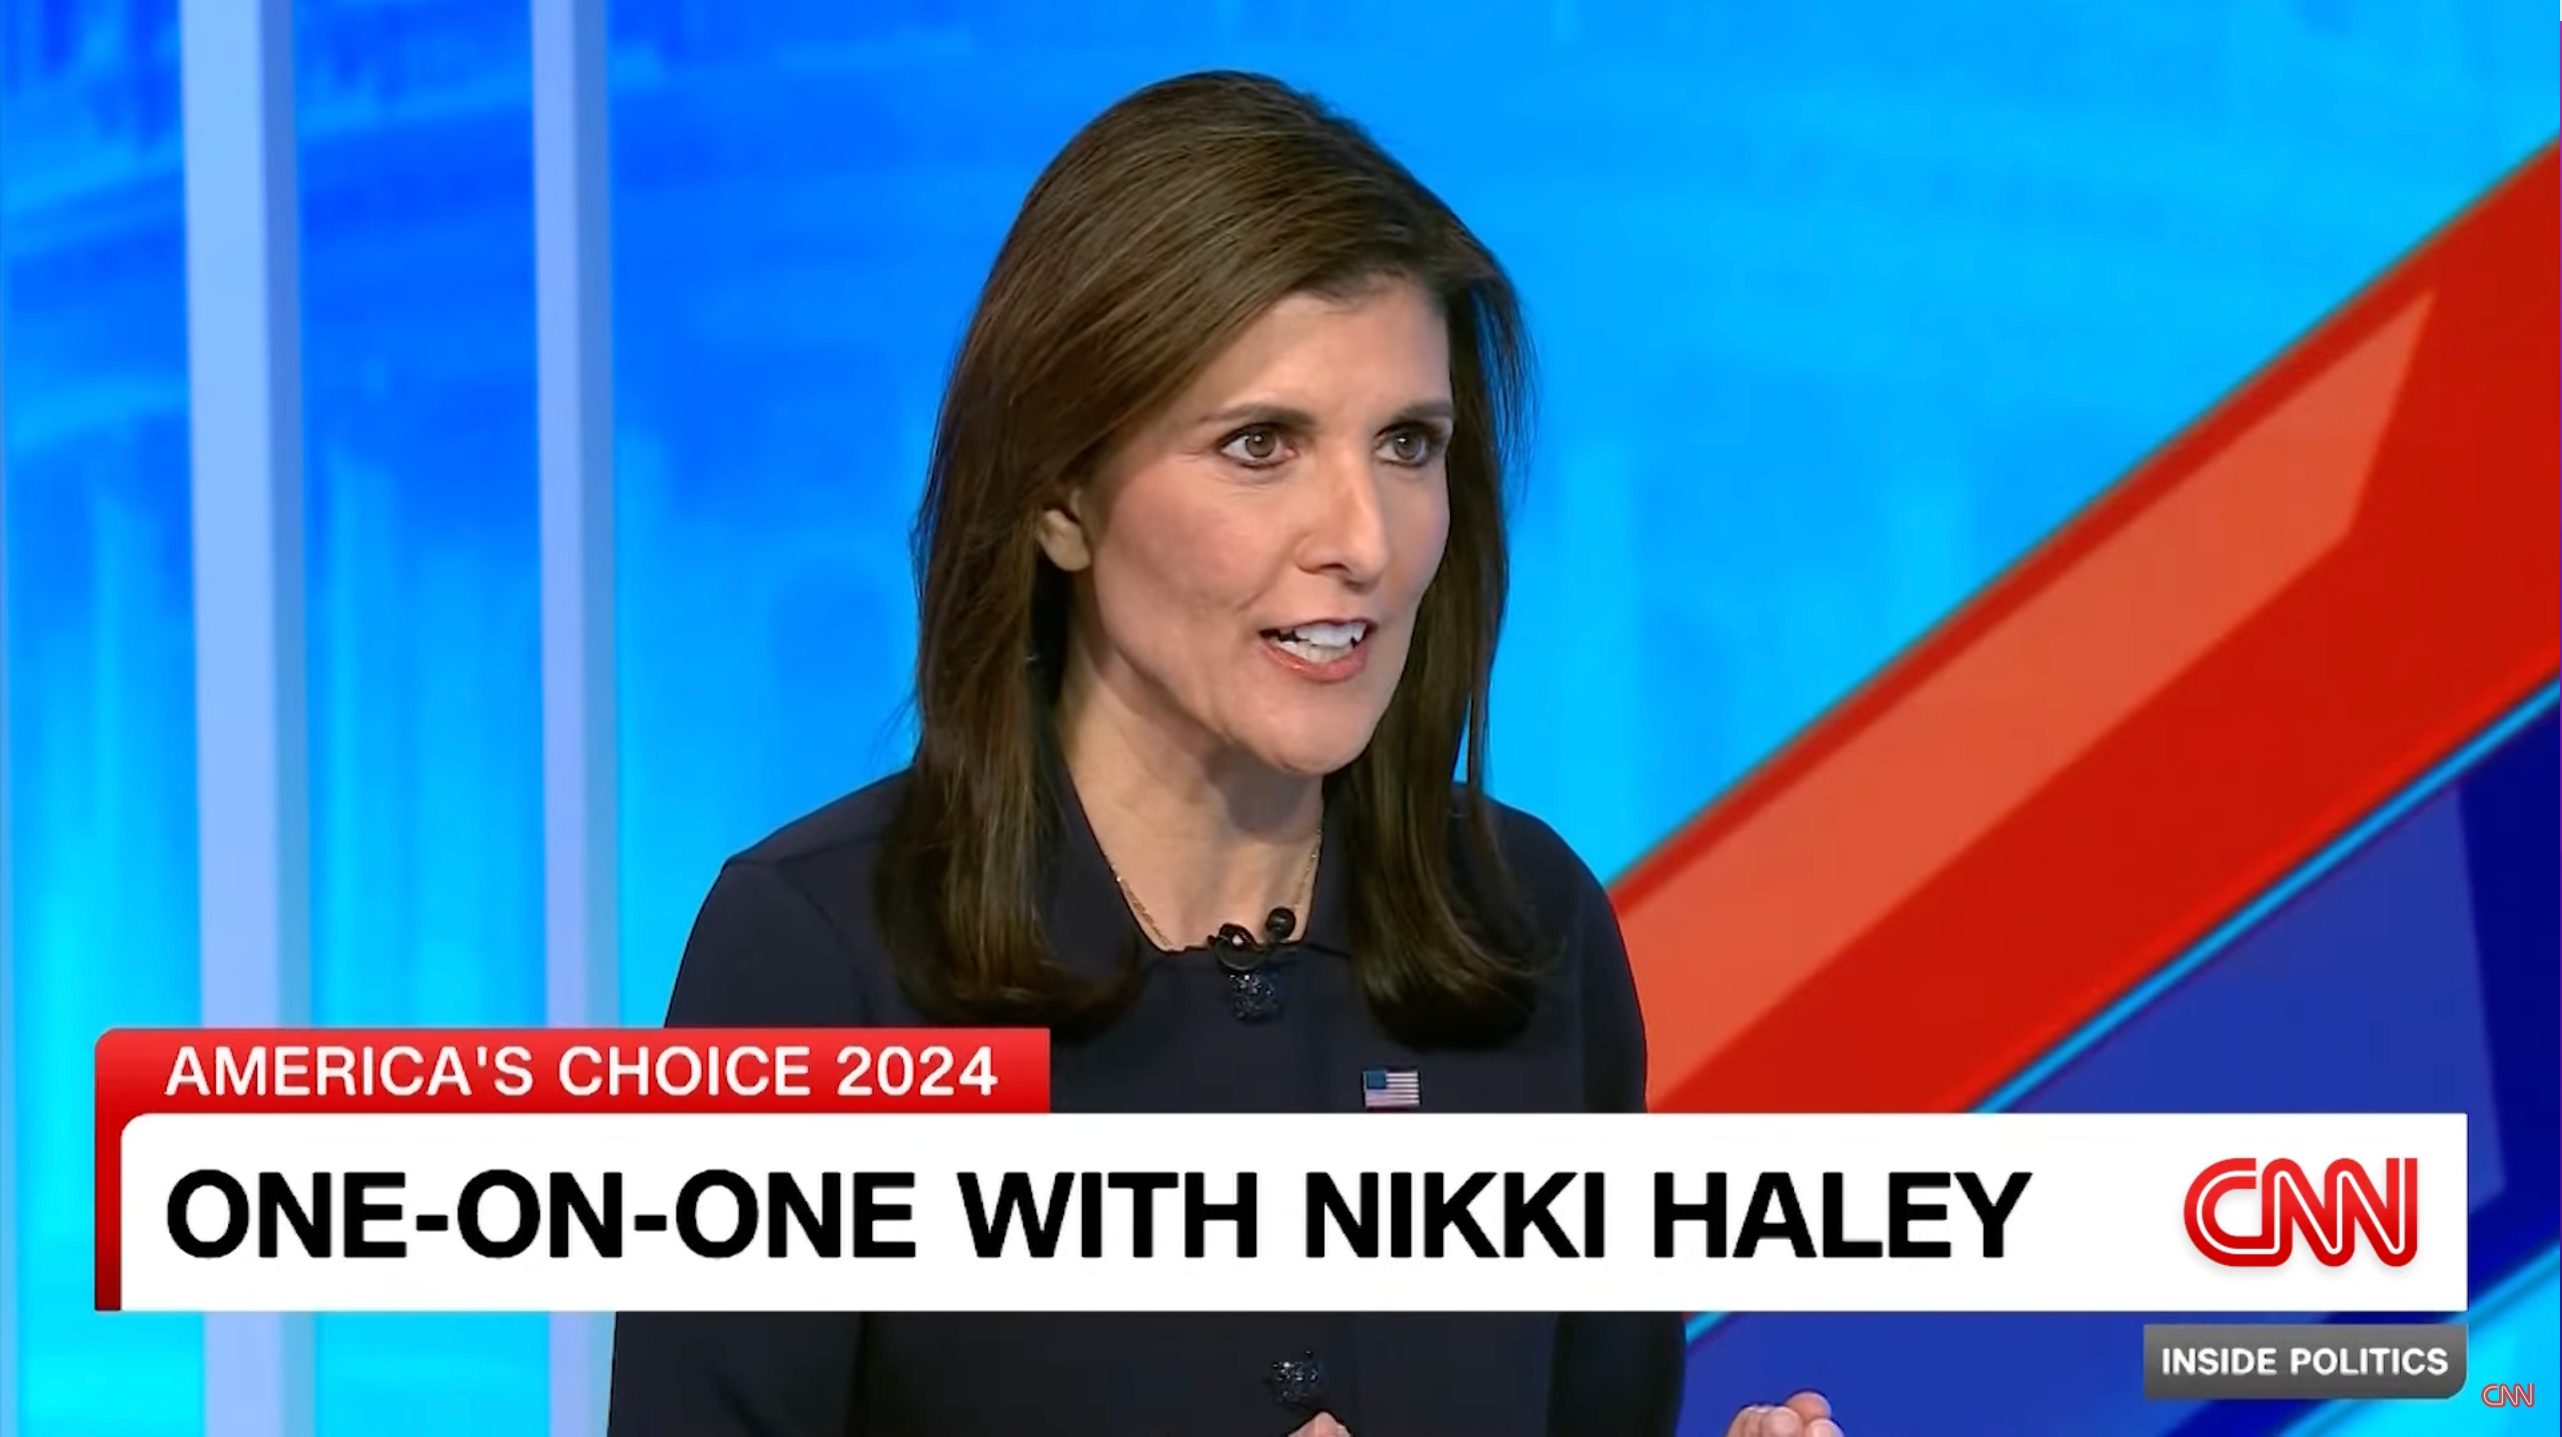 Nikki Haley supports criminal trials for Trump before elections